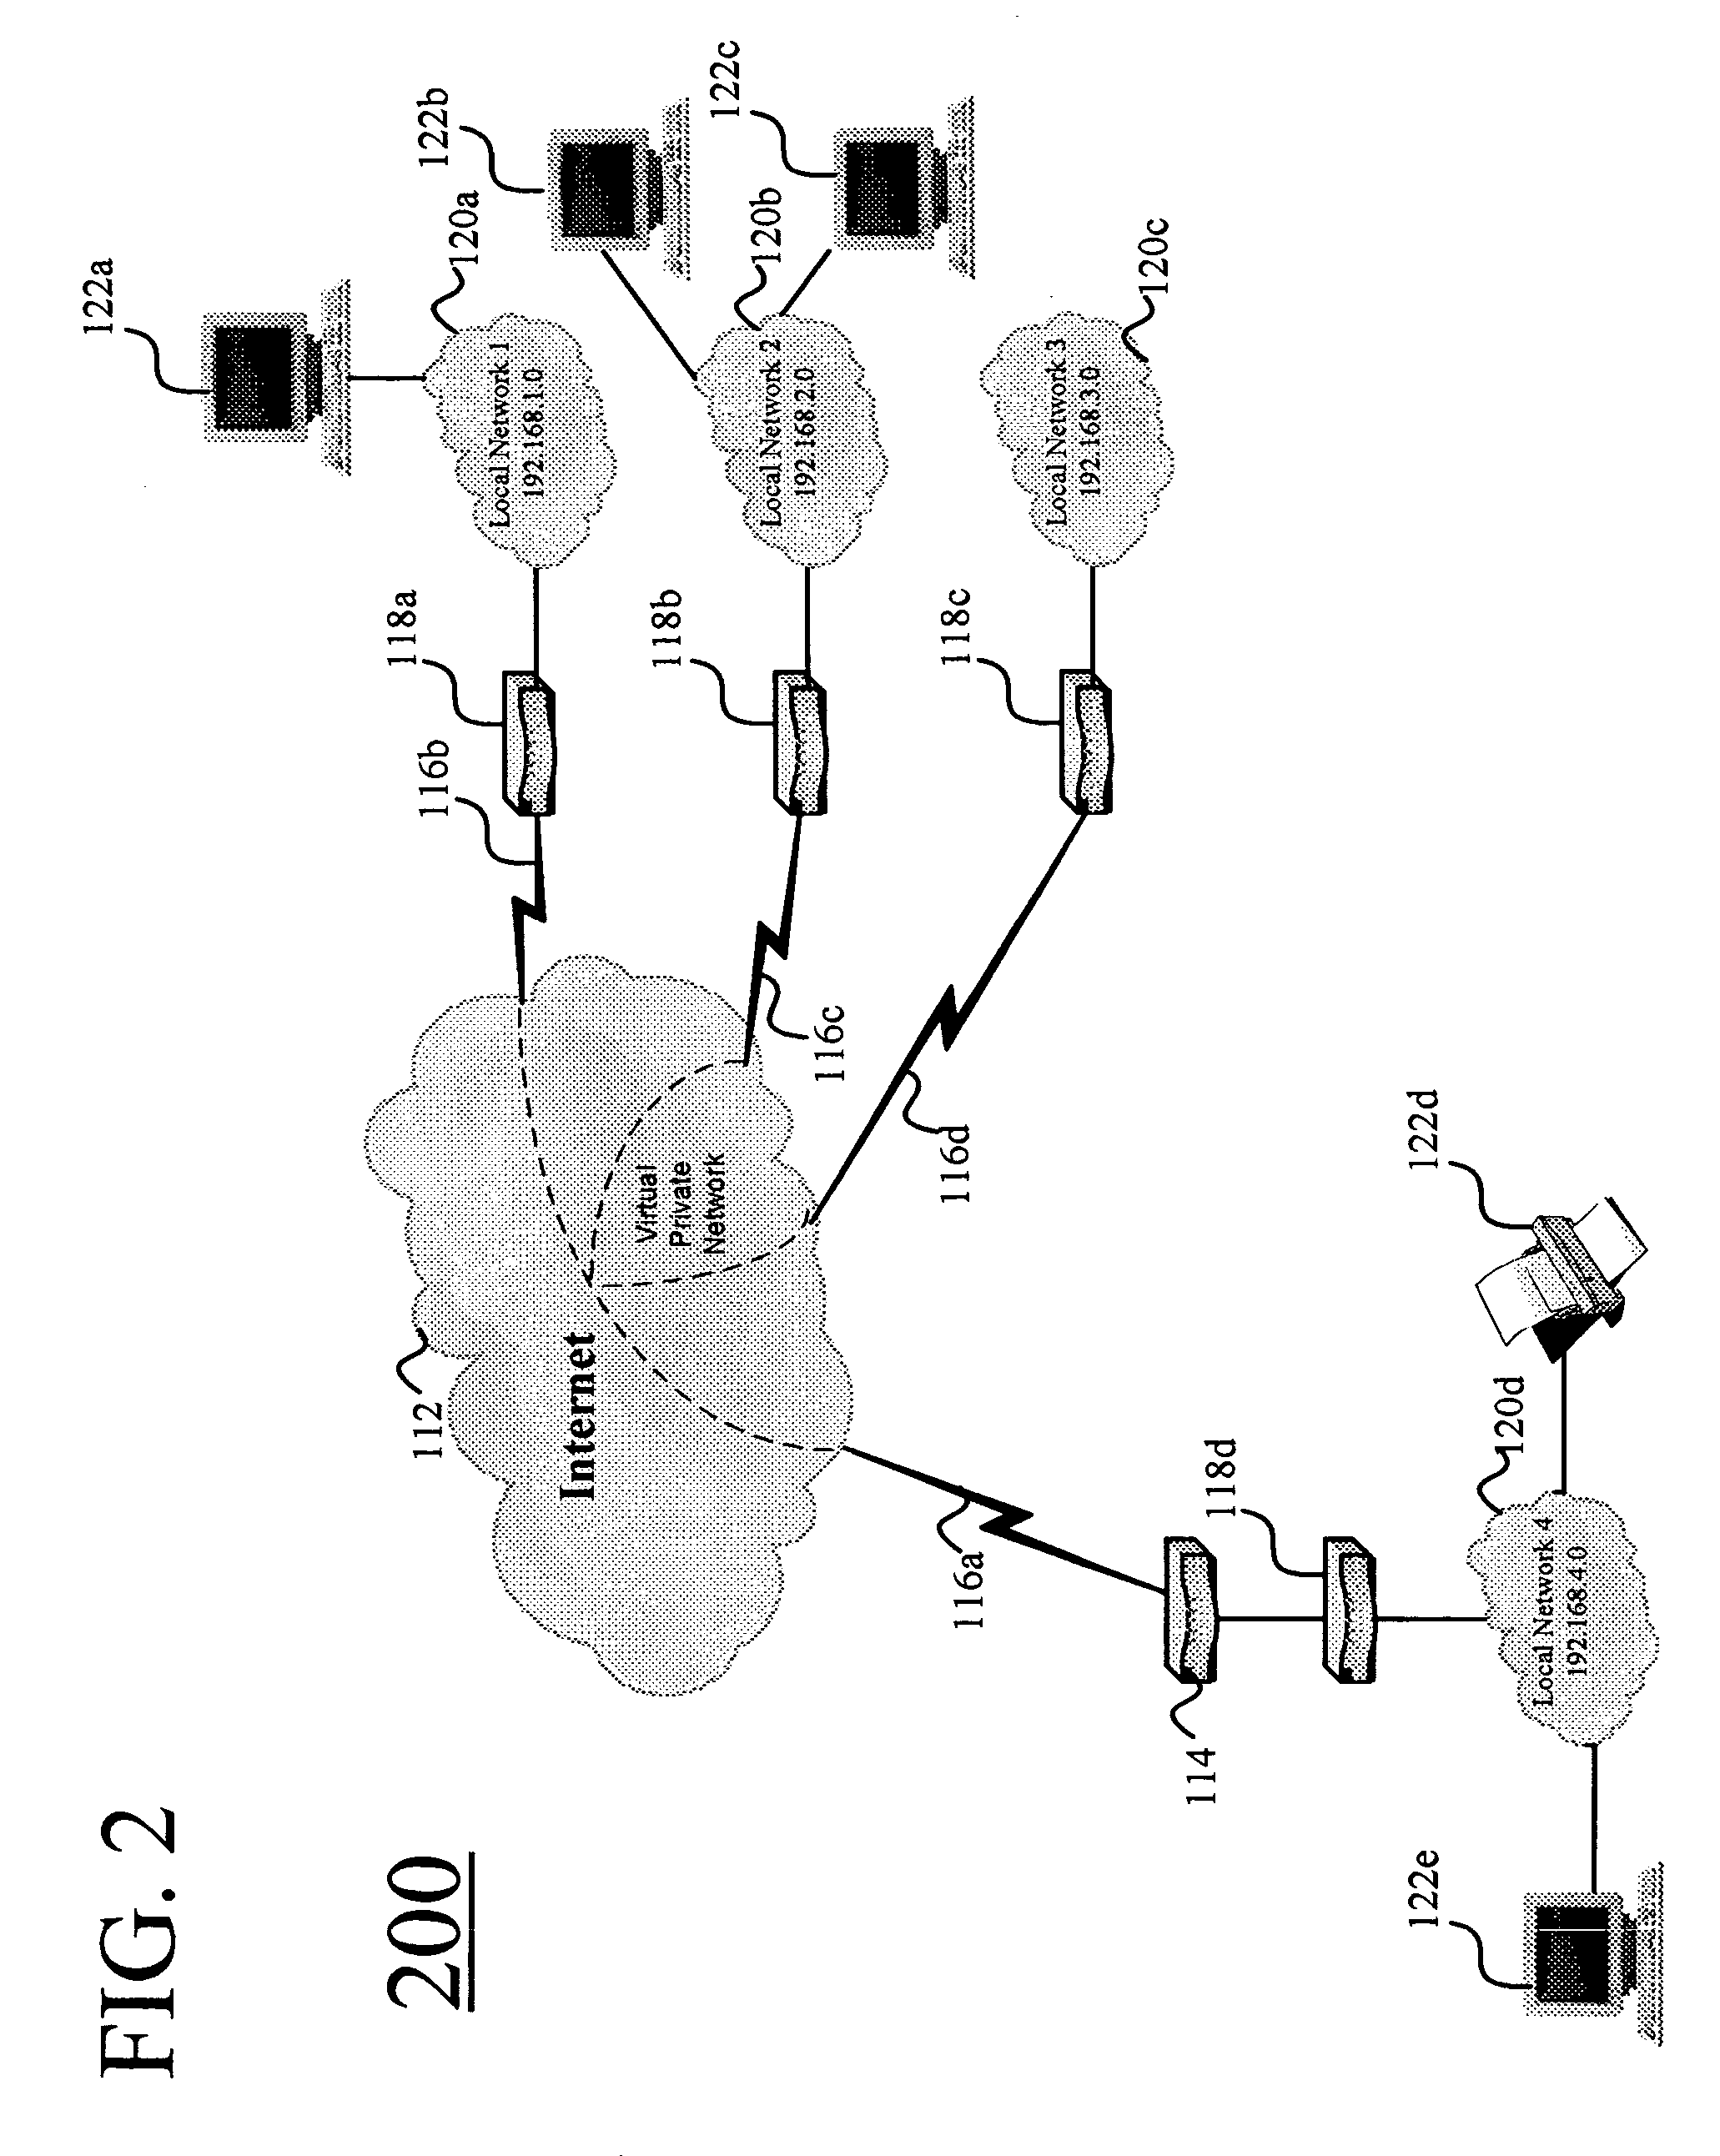 Systems and methods for automatically configuring and managing network devices and virtual private networks